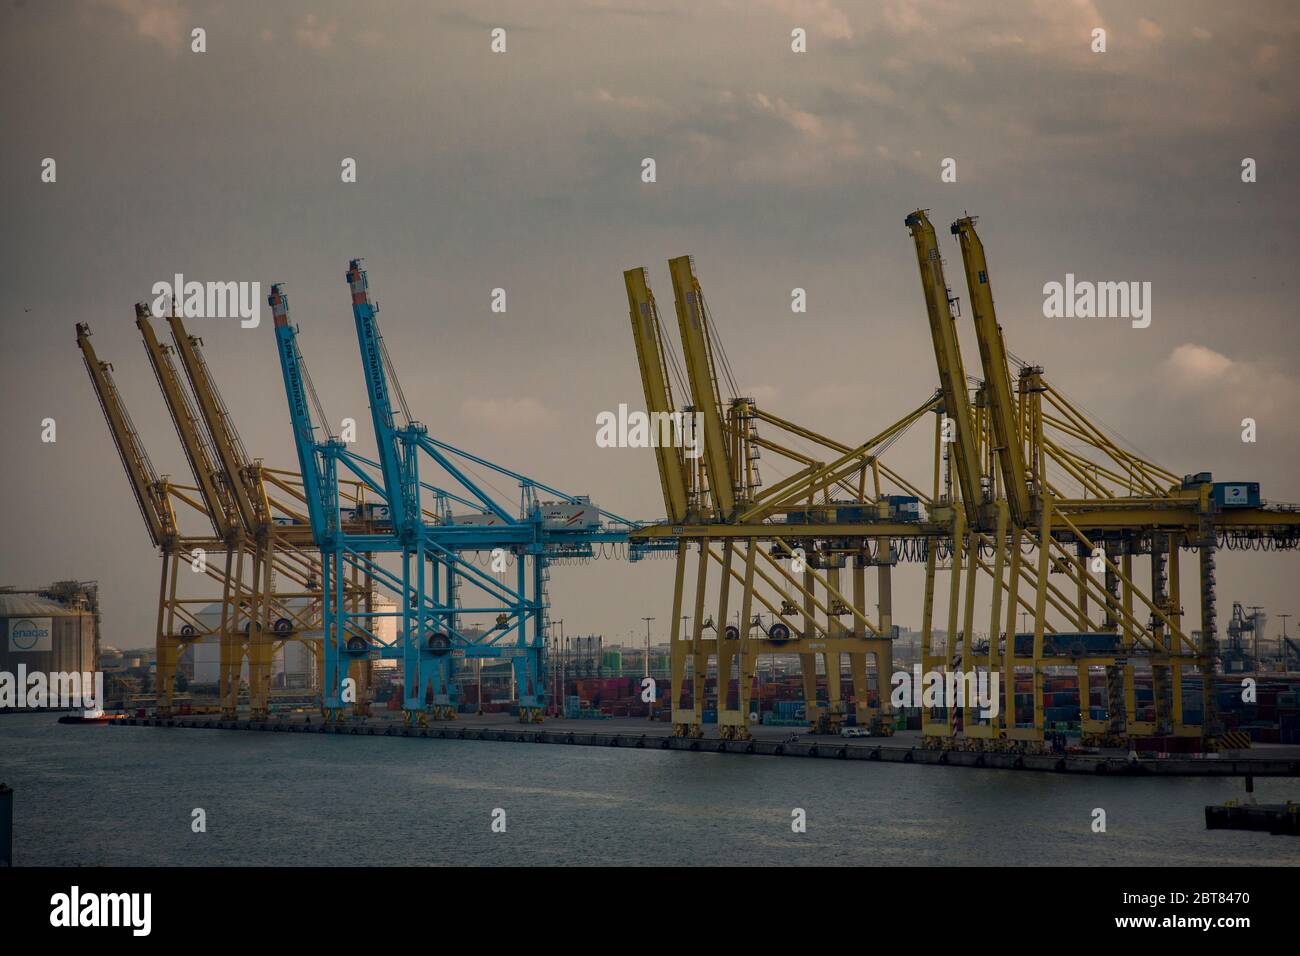 Container cranes at logistics and industrial area of La Zona Franca in Barcelona port. Spain exports more than imports due to the coronavirus crisis, despite the economic impact, the external deficit is expected to experience a historic reduction. Stock Photo